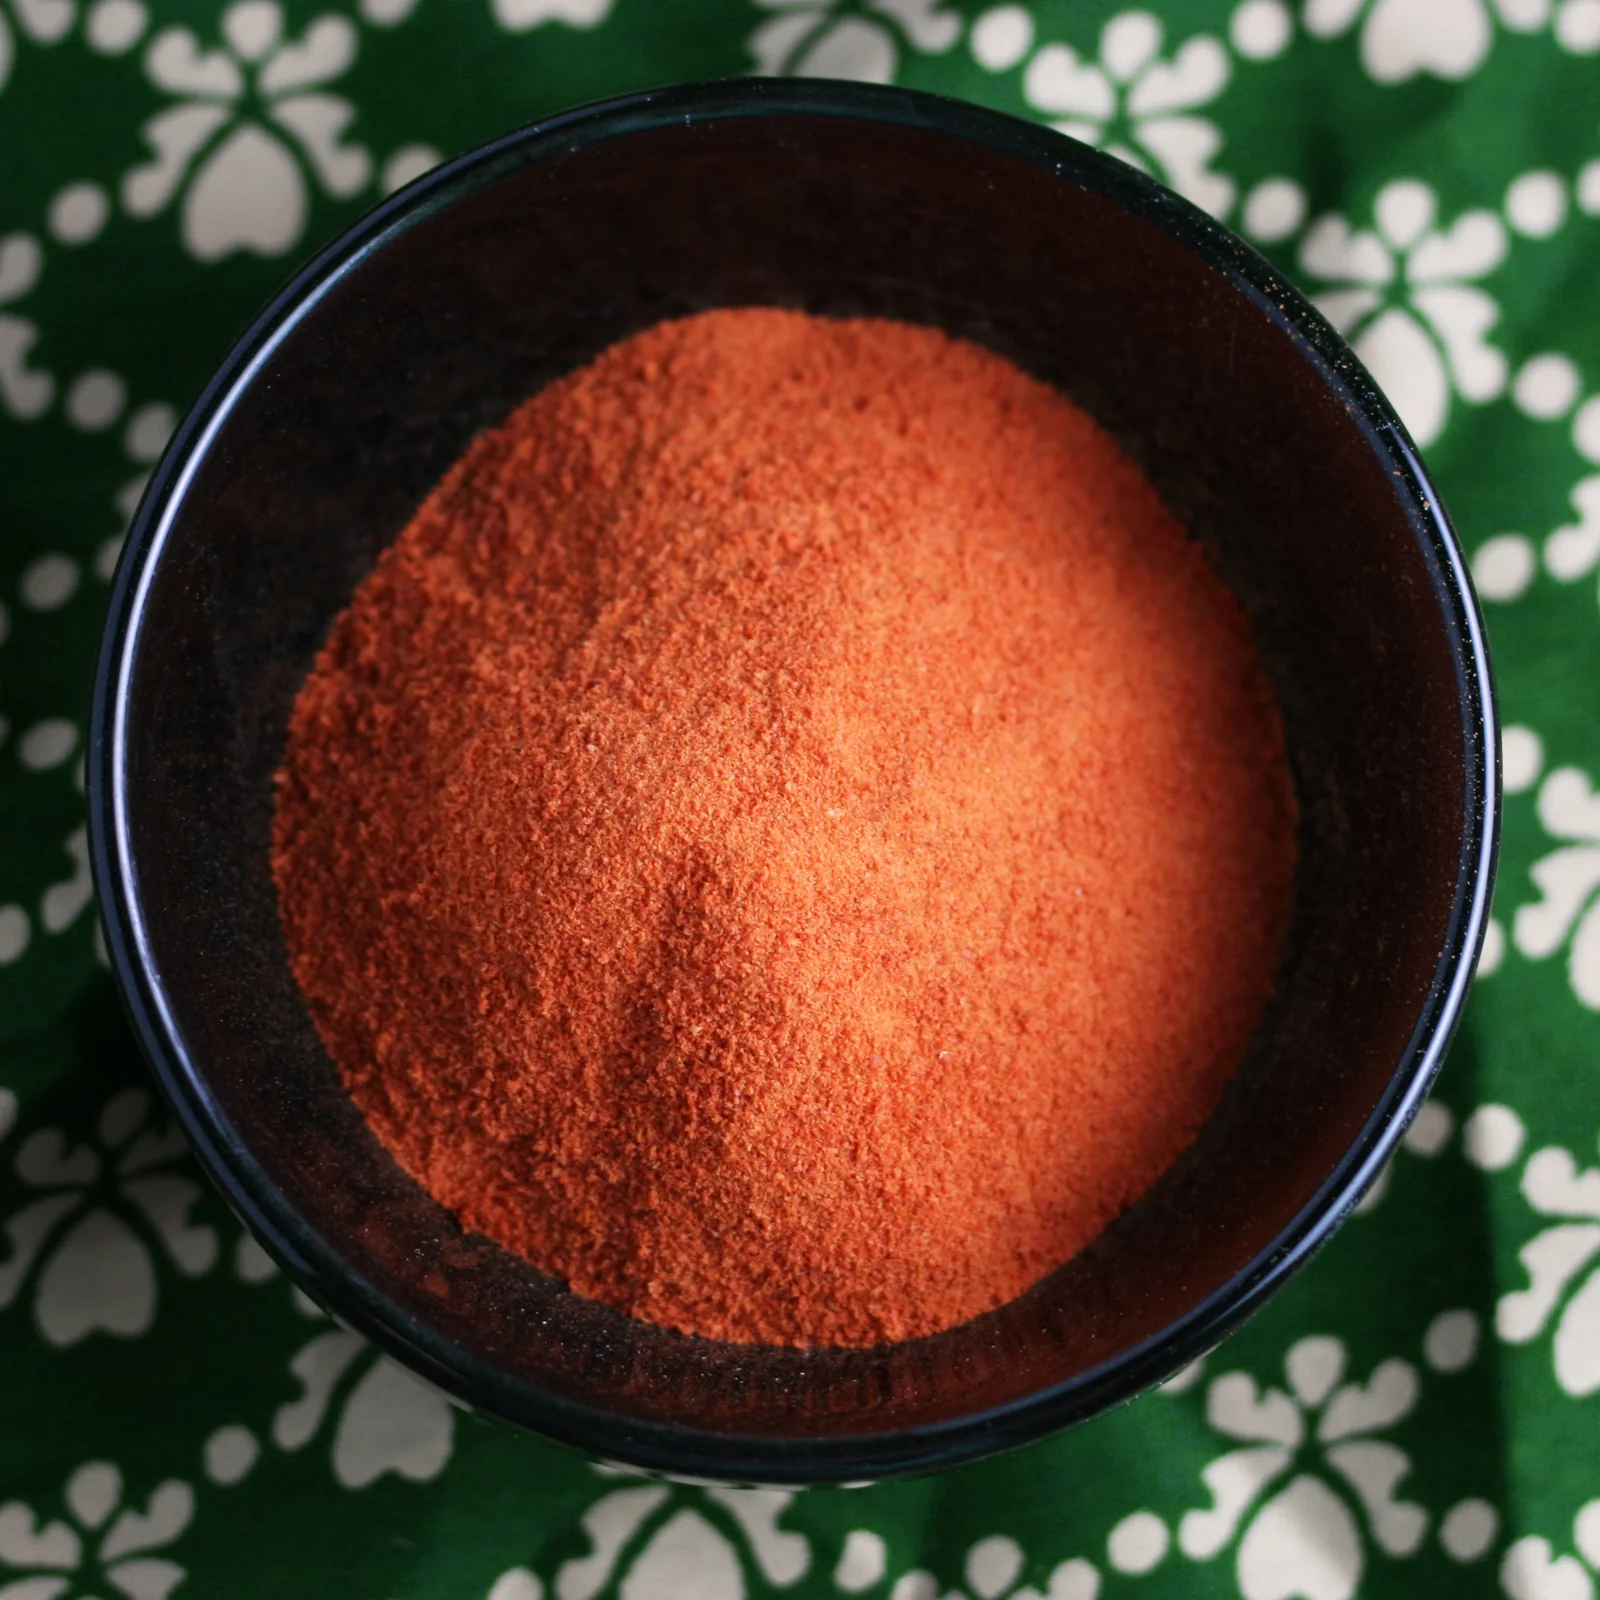 How To Make Tomato Powder At Home Without A Dehydrator